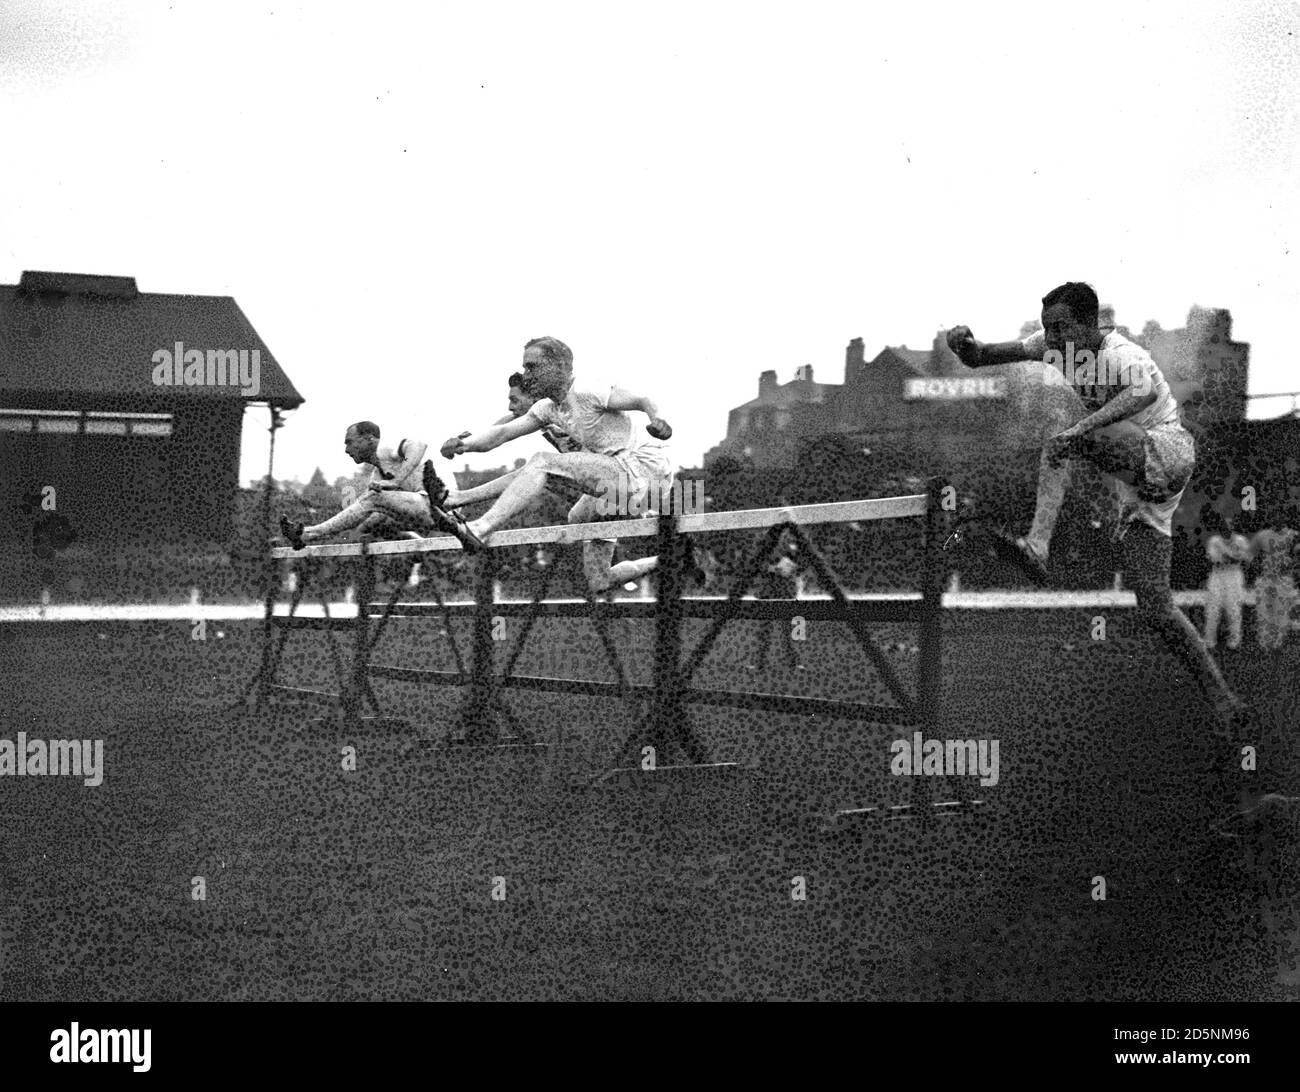 Lord Burghley leading over the first hurdle in the 120 yards hurdles race heat, which he won, in the Polytechnic Harriers athletic sports race at Stamford Bridge for the Kinnaird Trophy. *Glass plate is heavily corrupted. Stock Photo